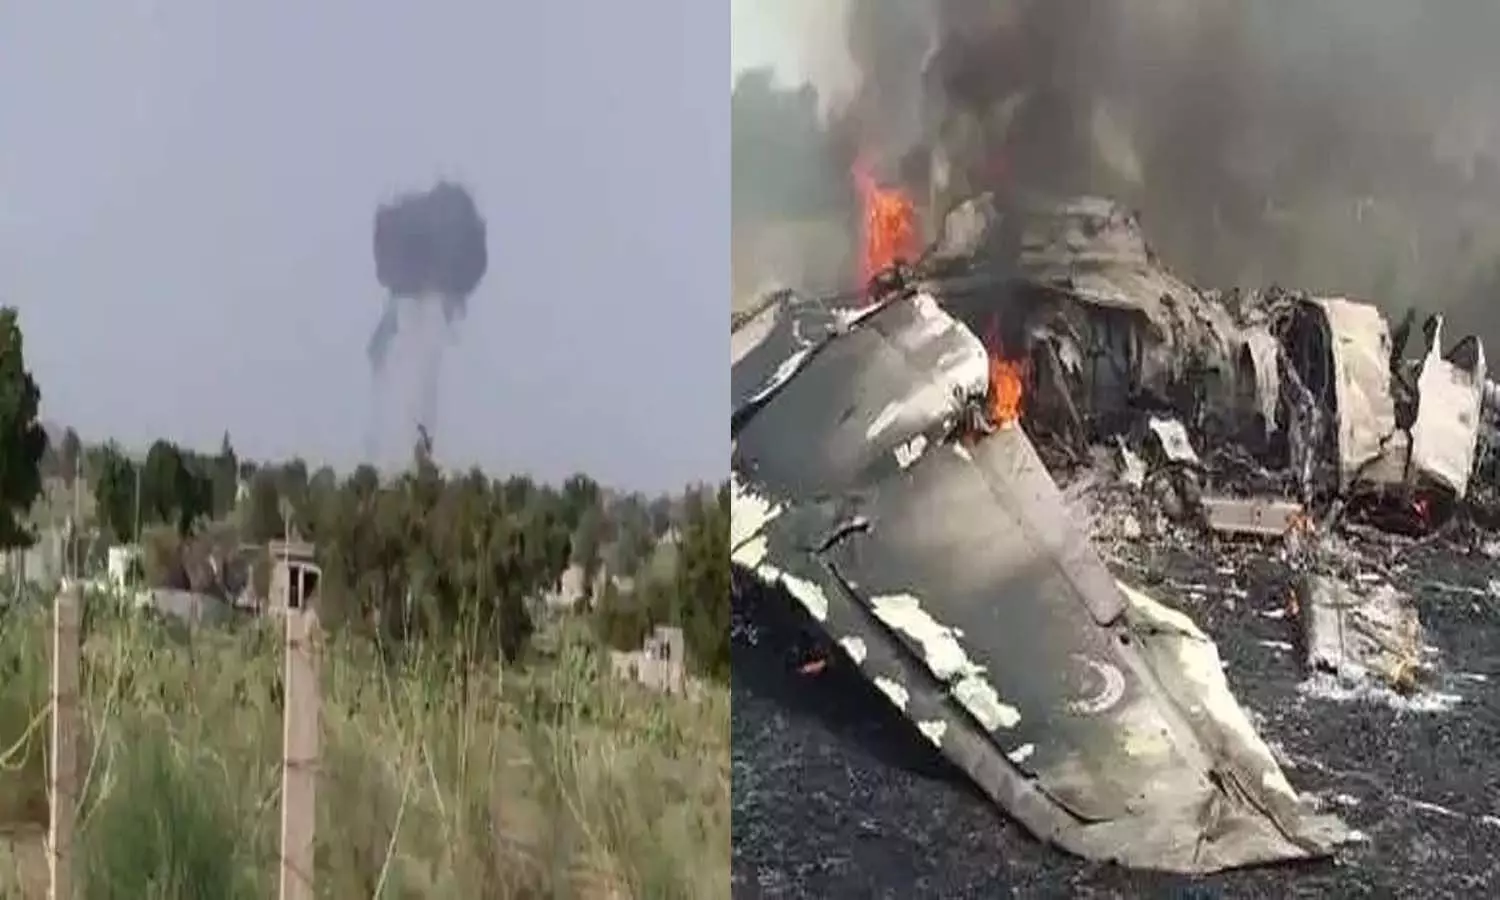 Indian Air Force fighter plane MiG-21 Bison crashed, this accident happened in Barmer district of Rajasthan.